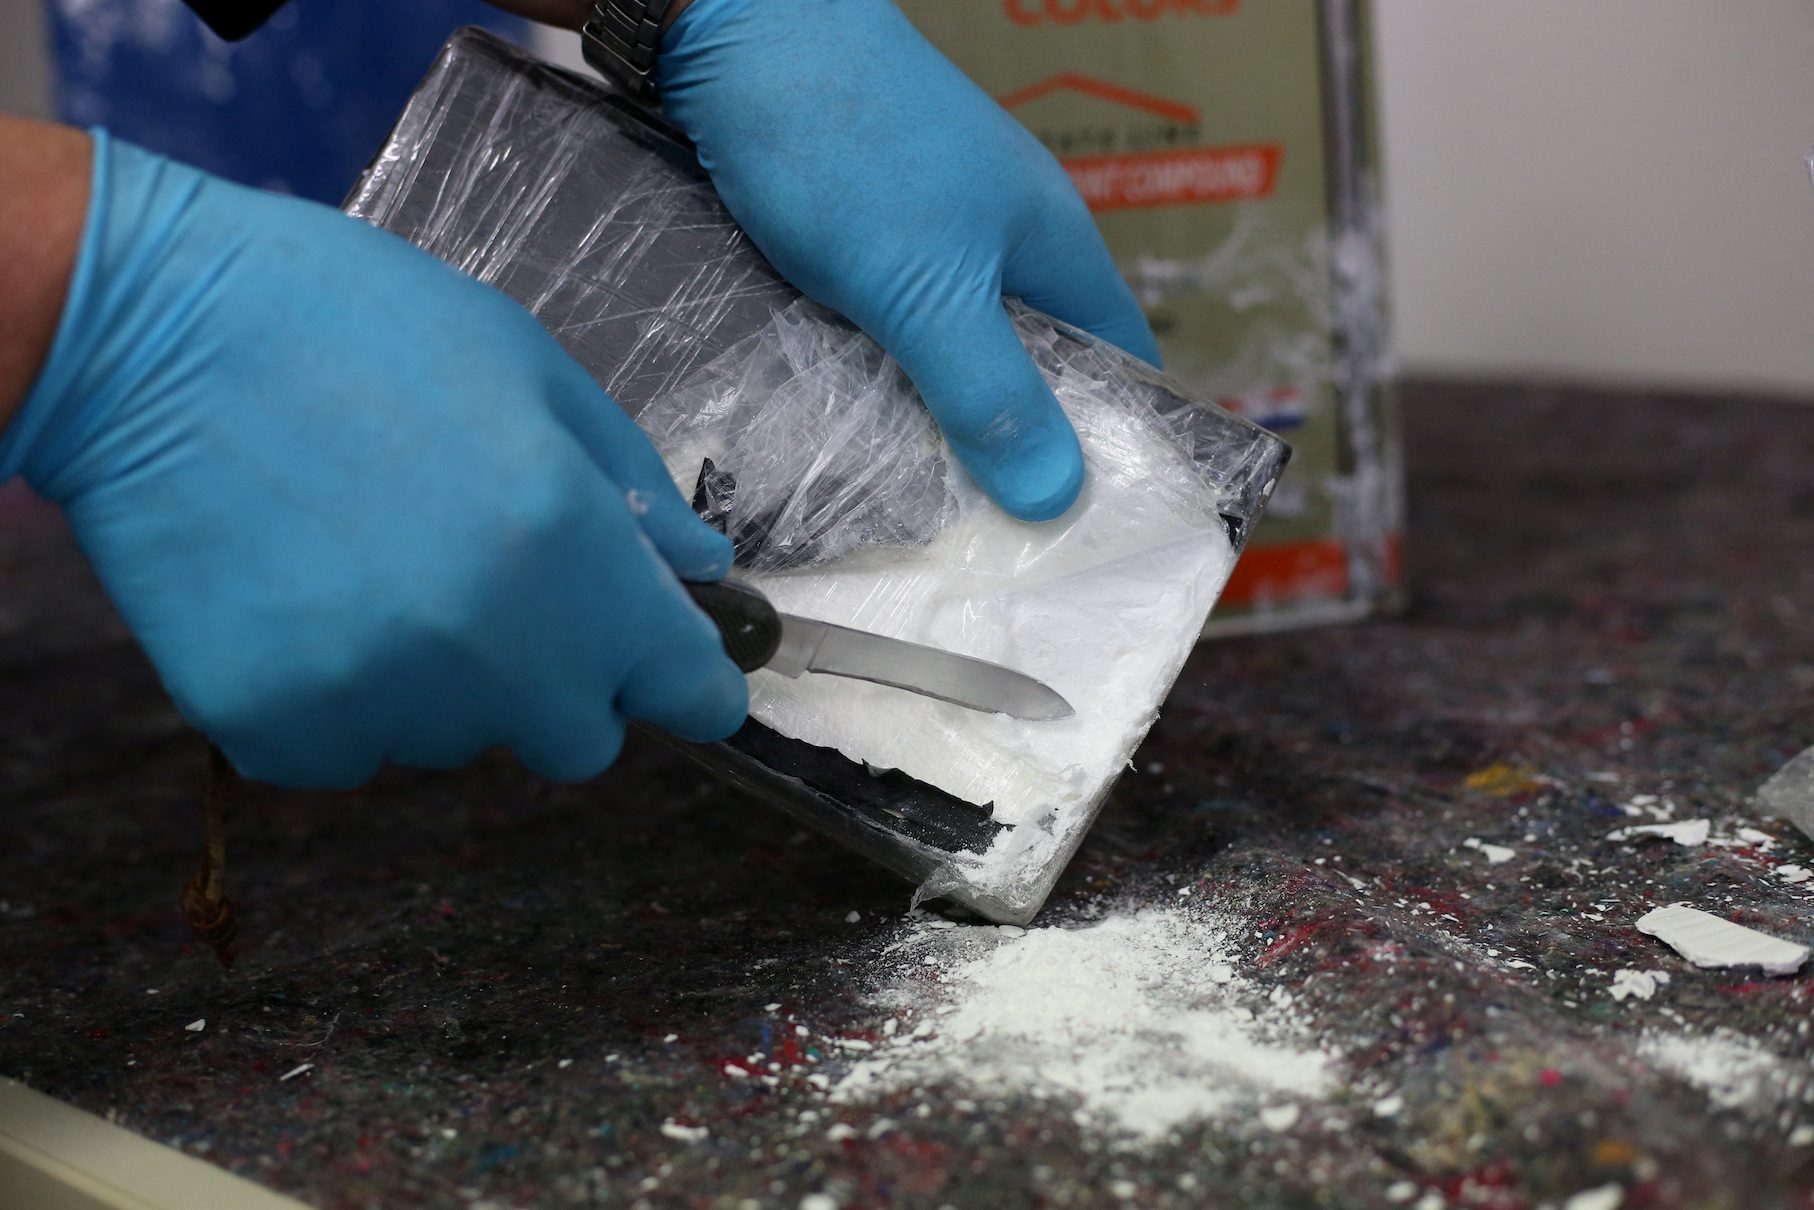 Cocaine use has risen across Europe, study shows